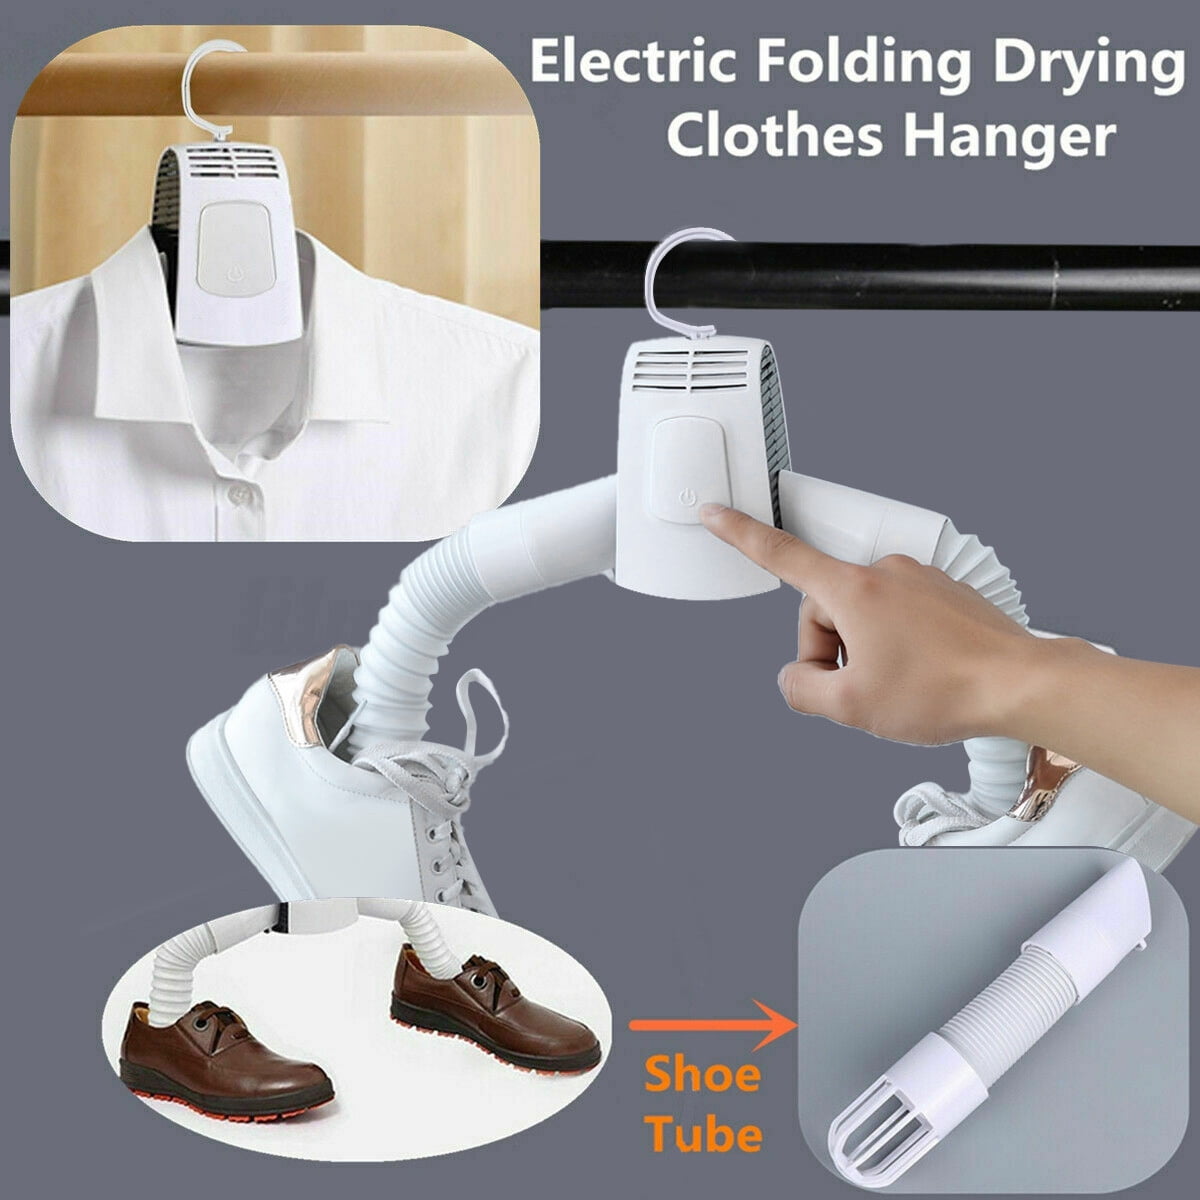 Happyline Portable Clothing Drying Hanger, Compact Electric Clothes  Drying Rack, Smart Shoes Dryer Heater Great for Travel Business Home